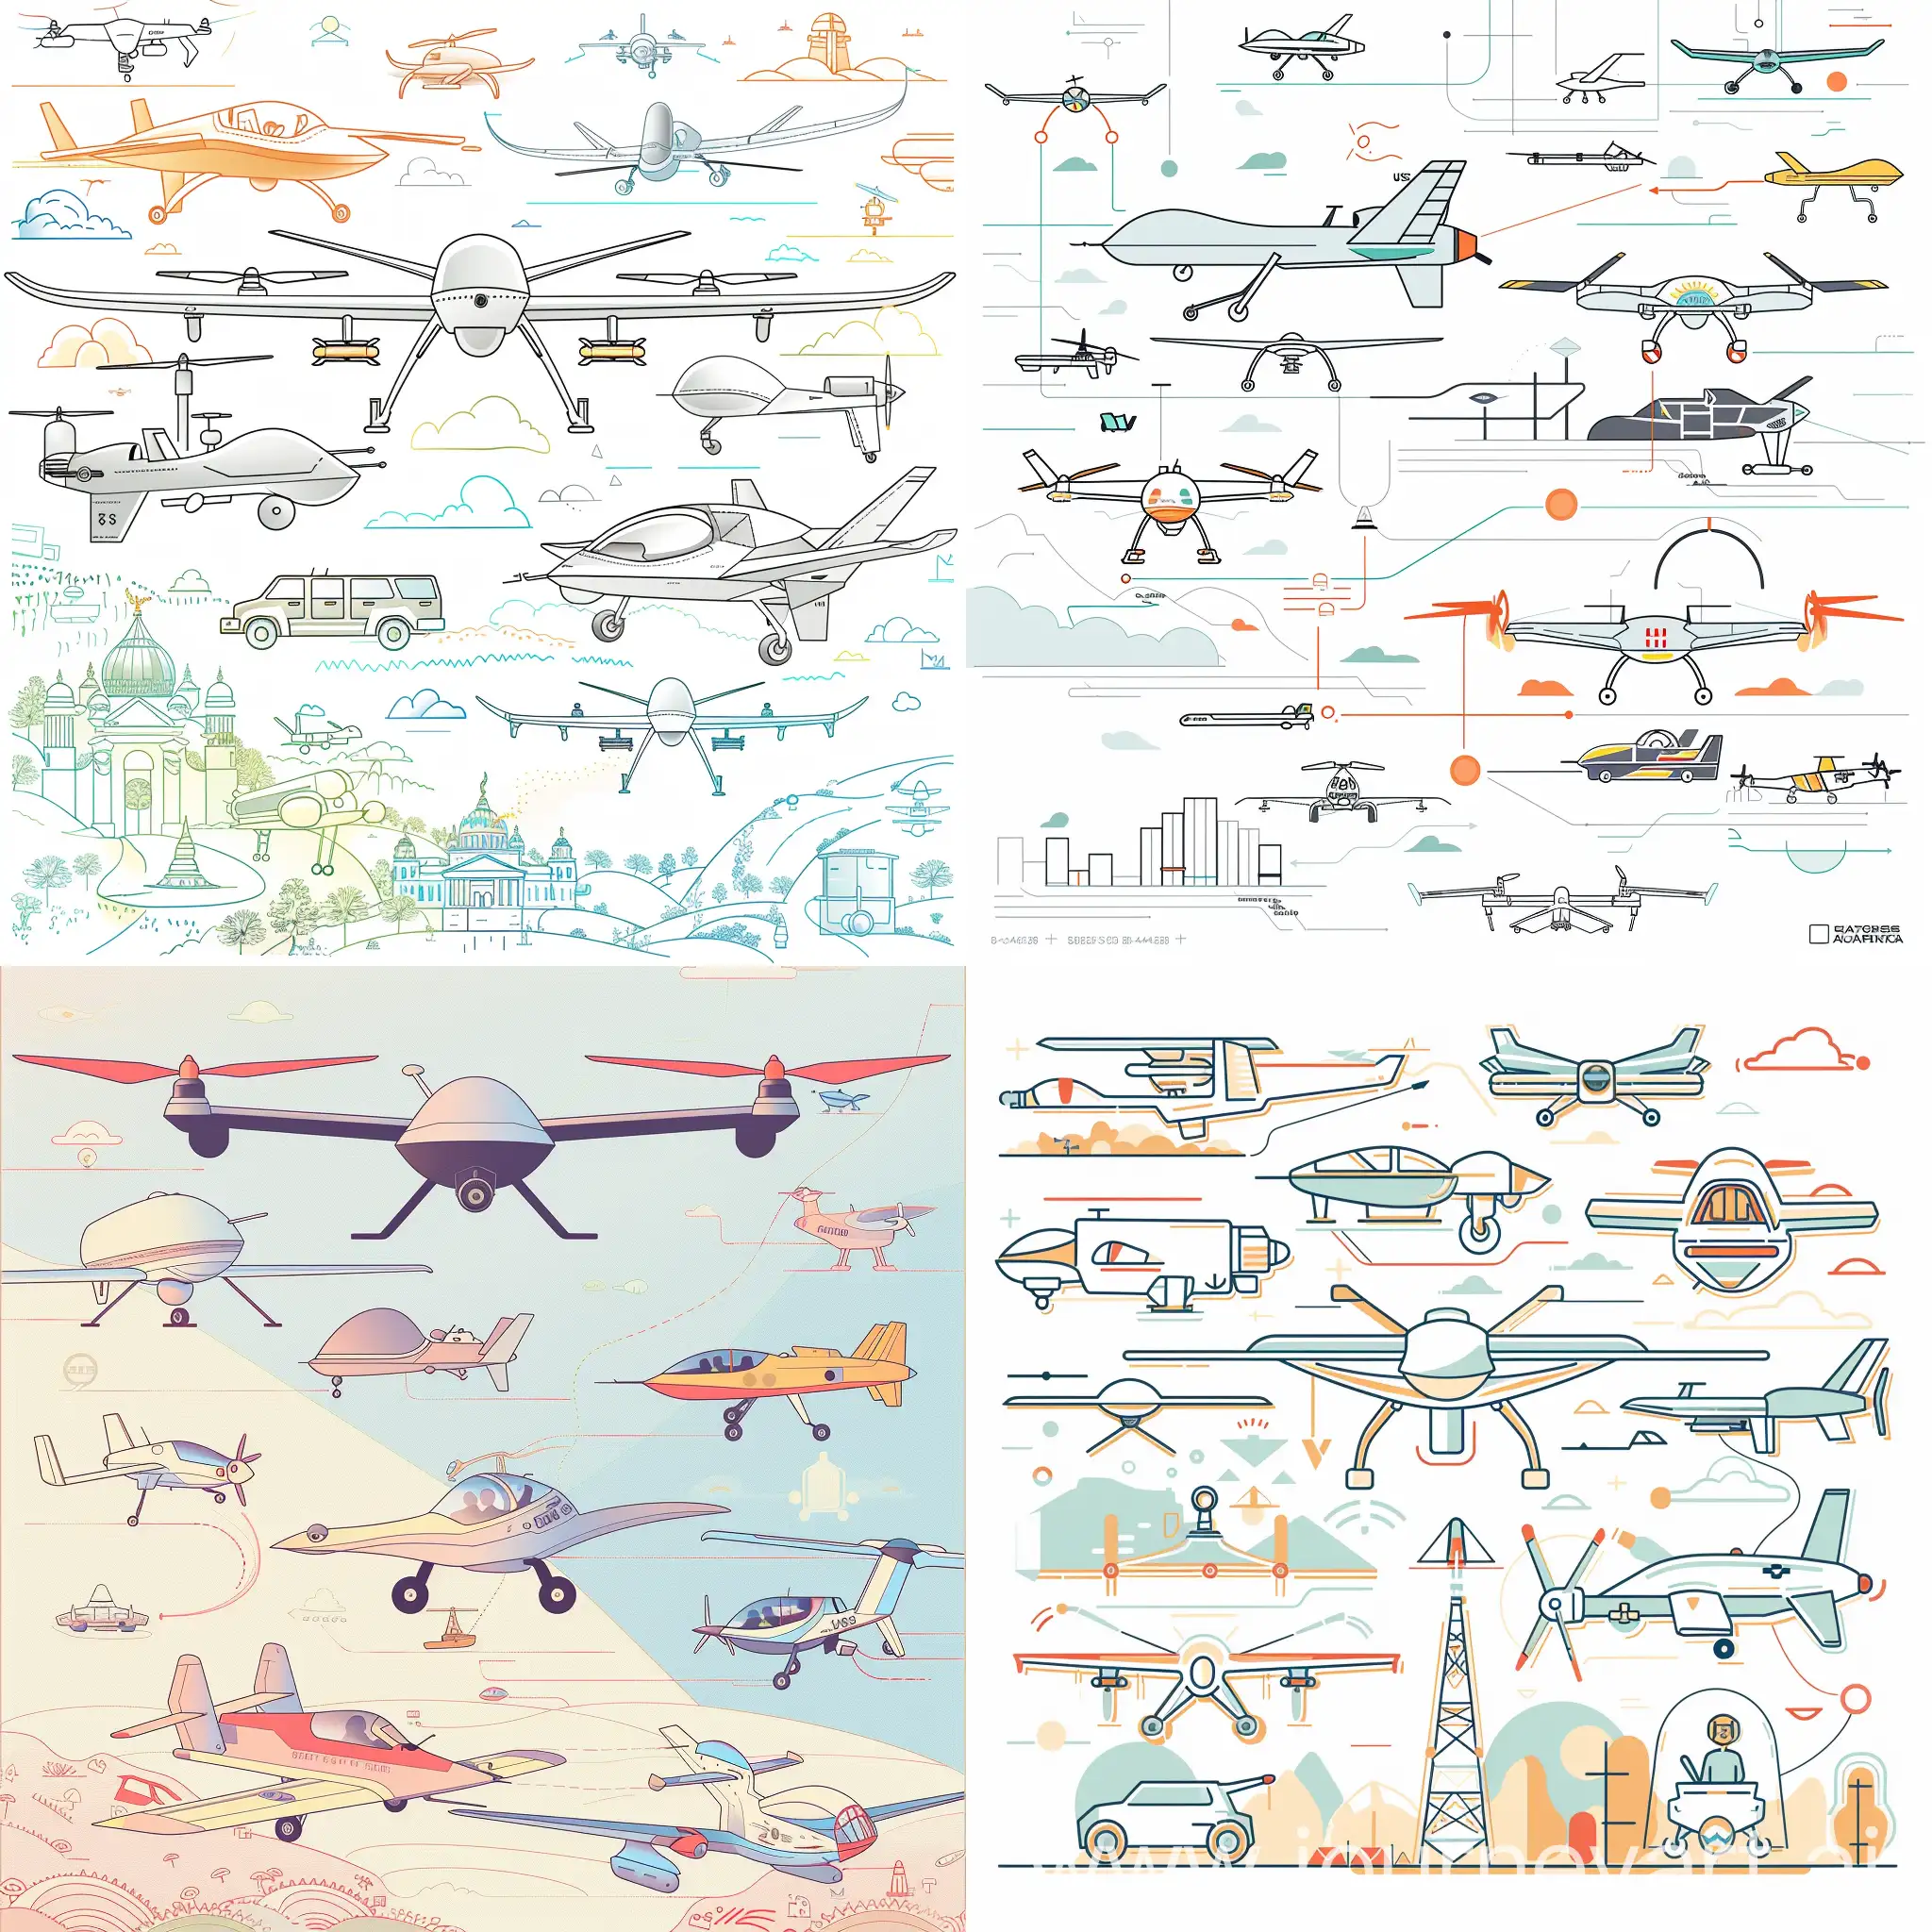 Create an outline illustration for a mural depicting the evolution of UAVs (Unmanned Aerial Vehicles) from the earliest models to the most contemporary ones. The scene should be suitable for a children's educational institution and should have a playful and engaging style, with clear and simple lines, use colors #b68cd6, #d06caf, #7d1e8e, #f7f3f6, #b659a0, #af95bb, #87599f, #5b3e7d, #acb4bc,#5b435c , and friendly shapes. Ensure the design seamlessly fits into a series of similar murals.